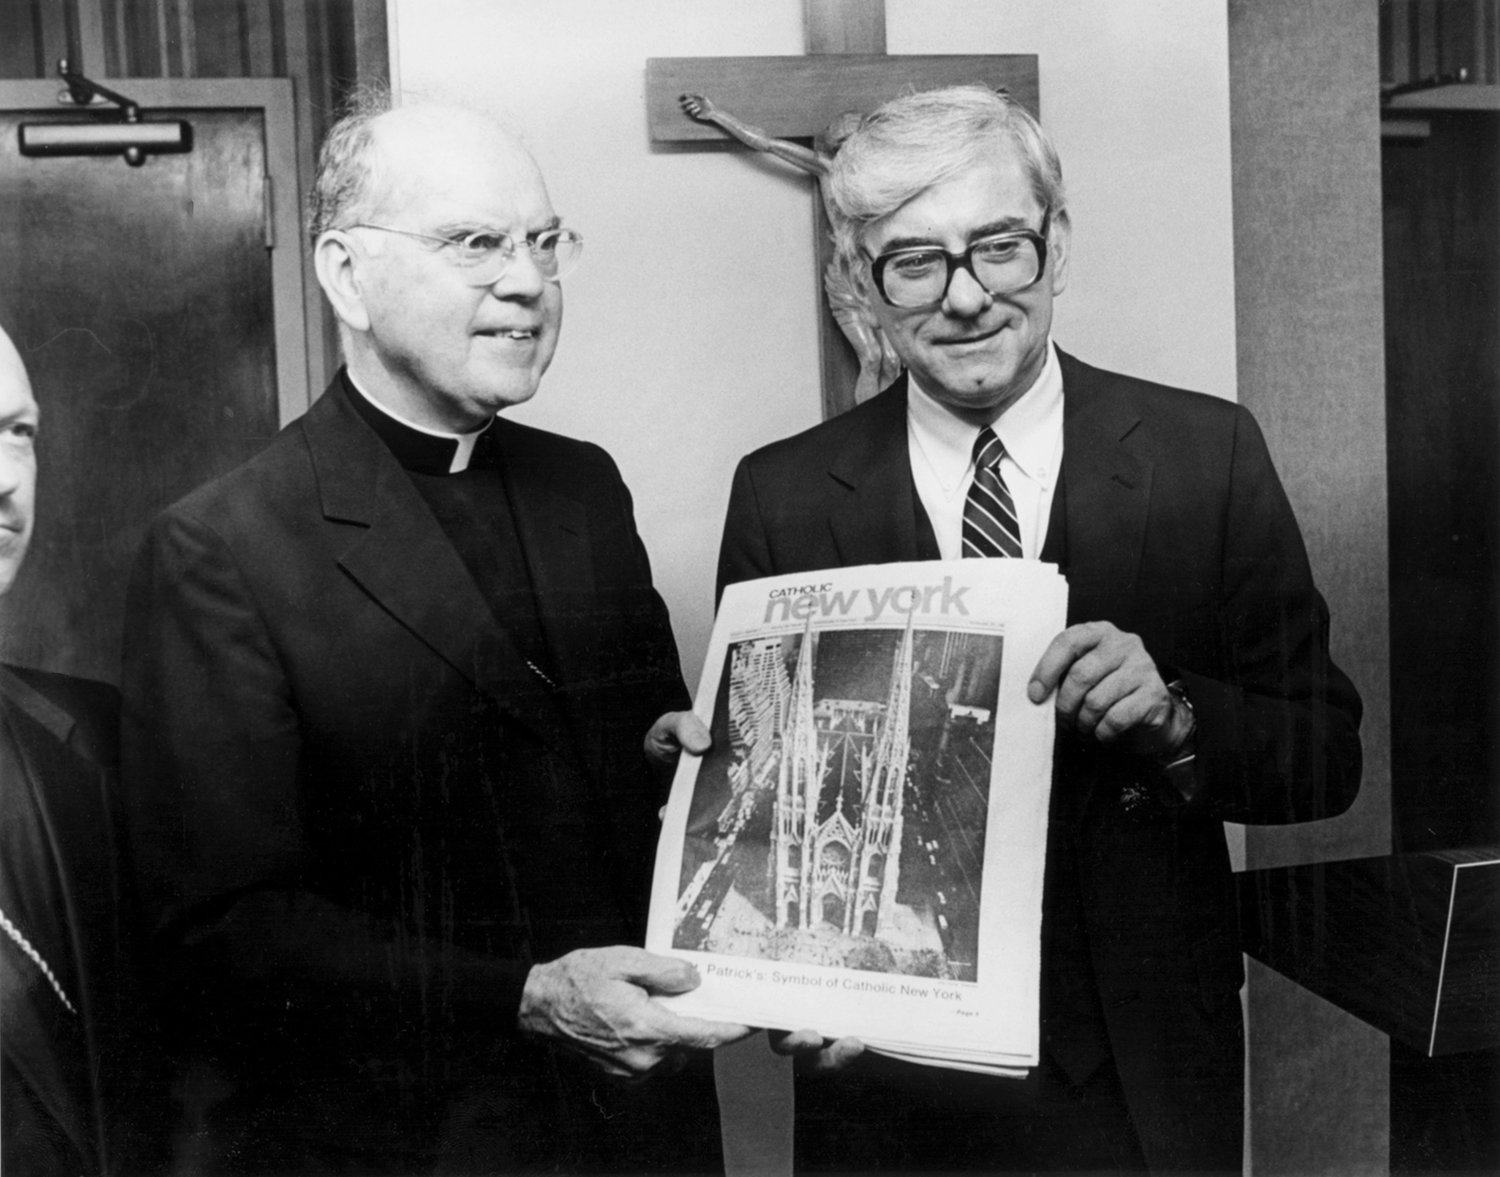 DEBUT ISSUE—Cardinal Terence Cooke, then-Archbishop of New York, and CNY’s founding editor Gerald M. Costello share a grip on the initial issue of Catholic New York dated Sept. 27, 1981. At 88 pages, CNY was a hefty read for the archdiocese and signaled a new path of engagement in communications.